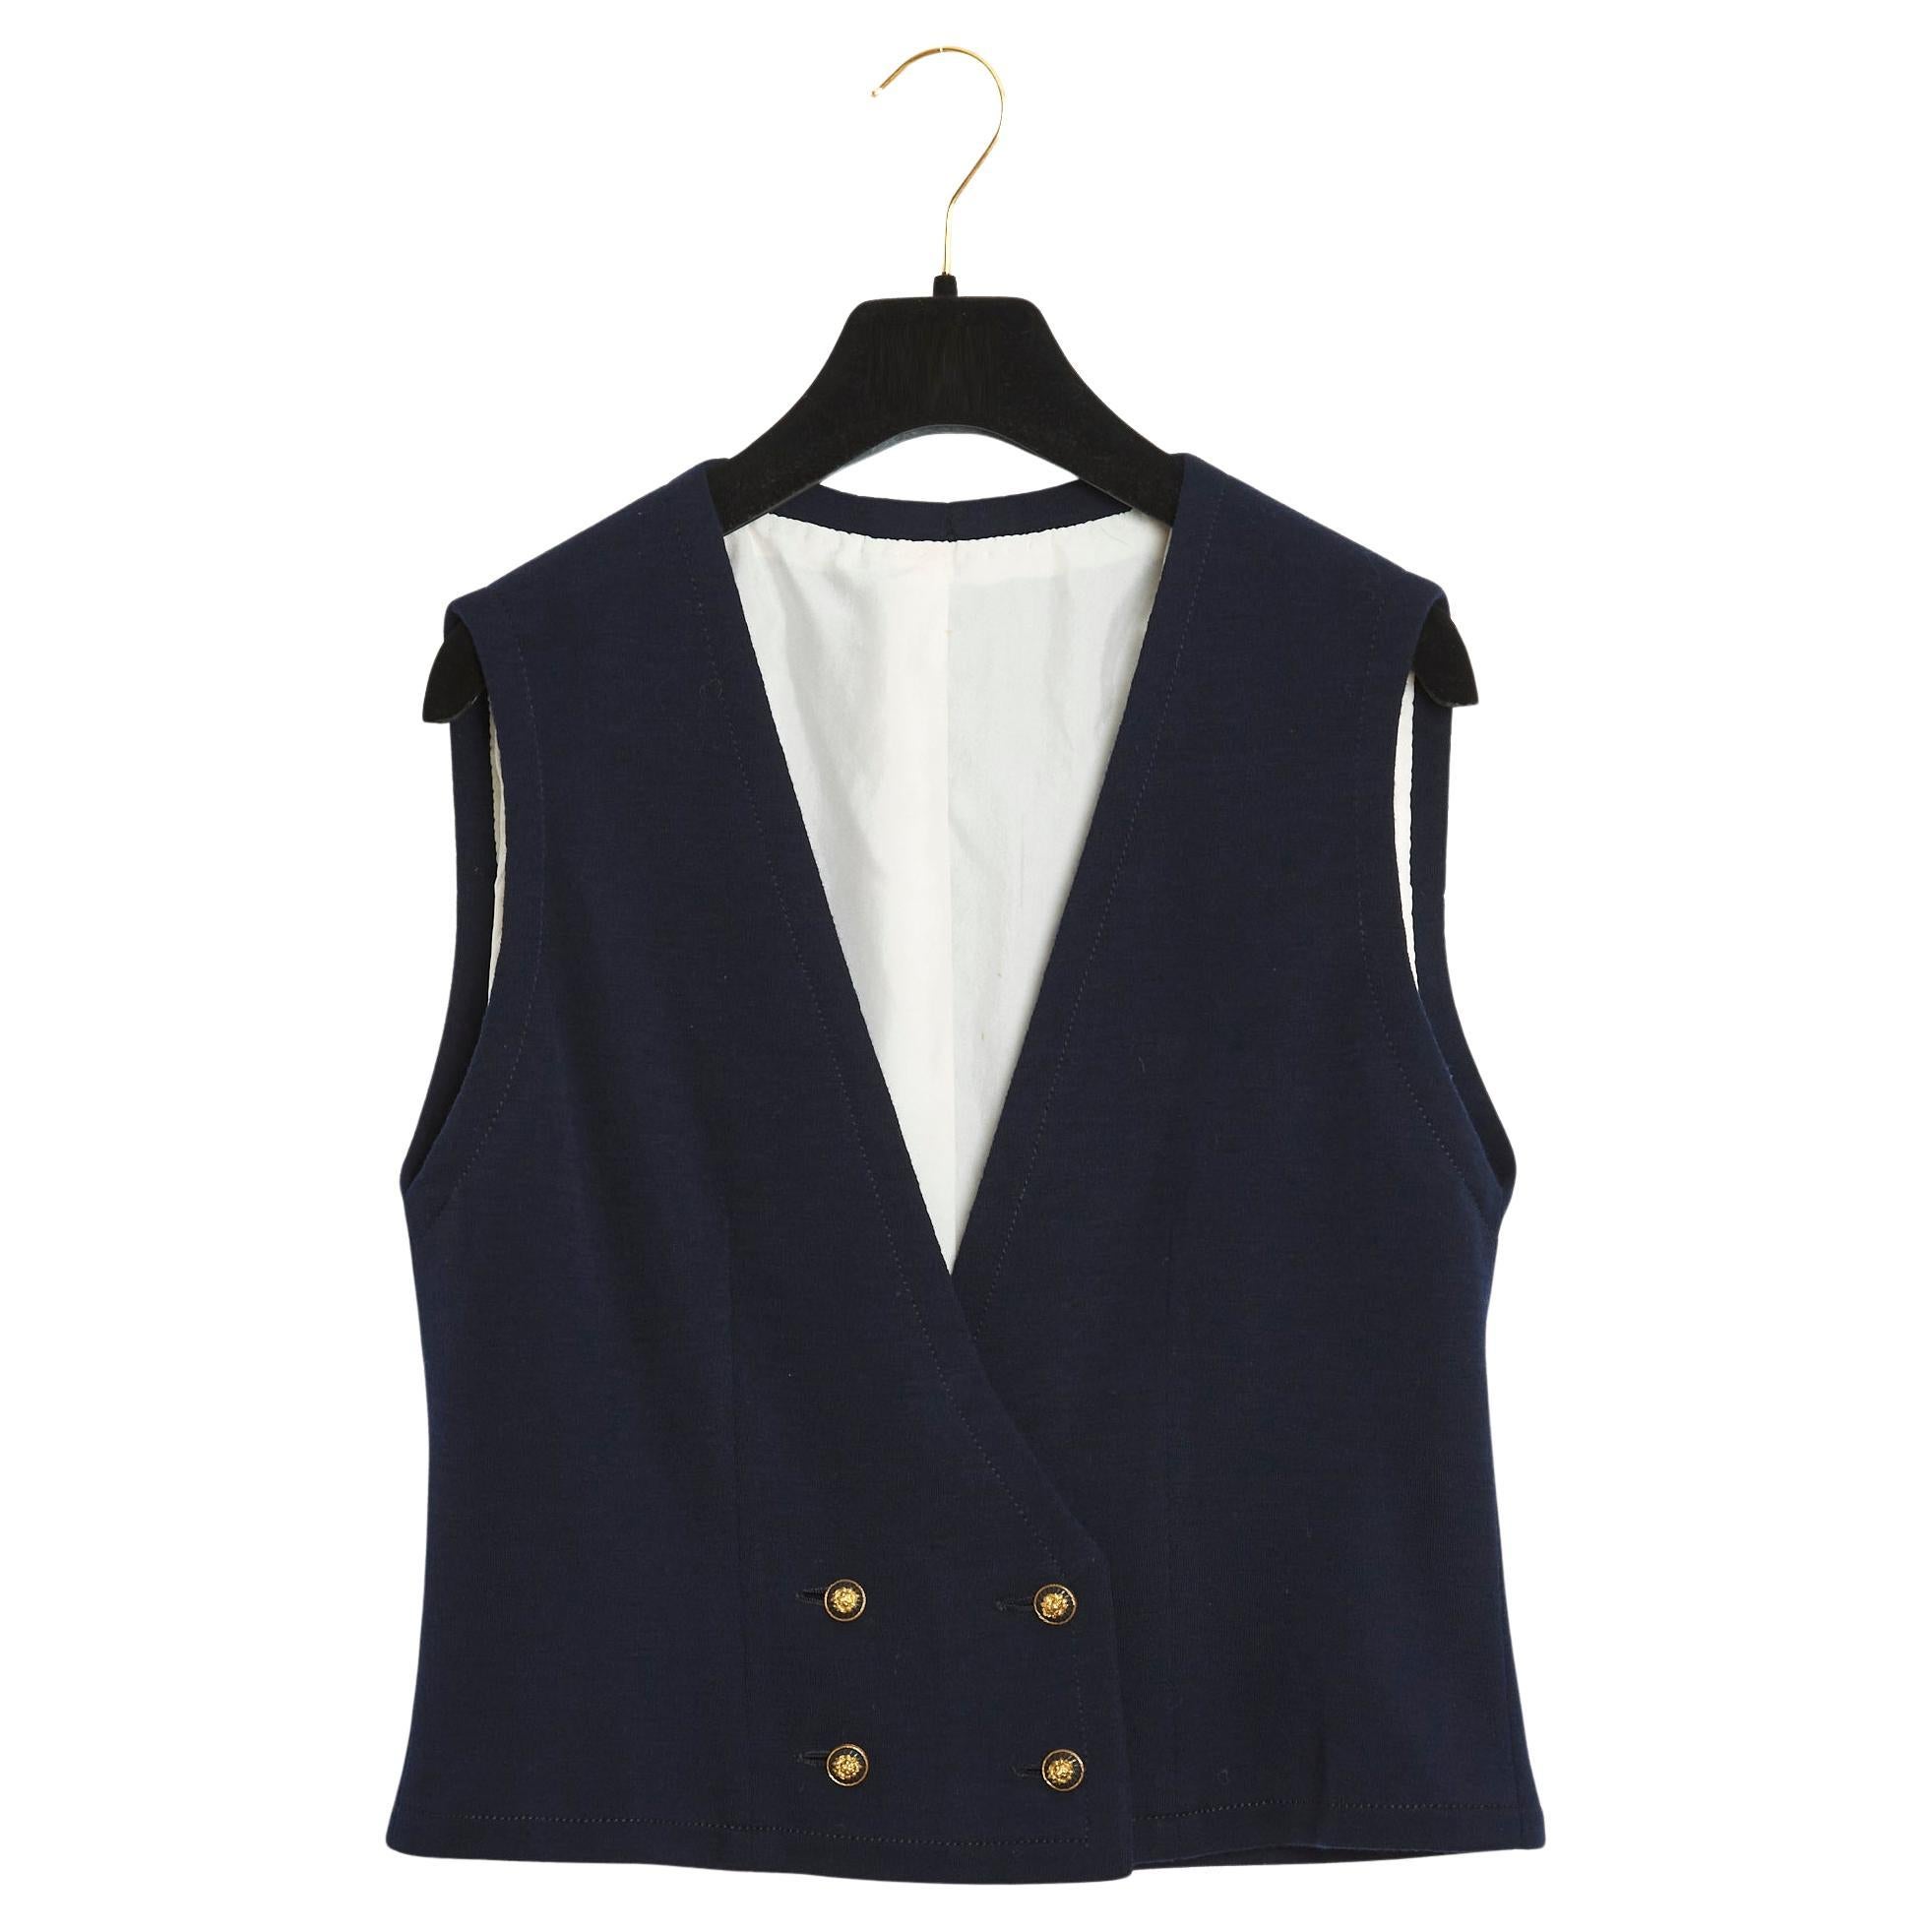 Chanel Haute Couture navy wool vest FR38